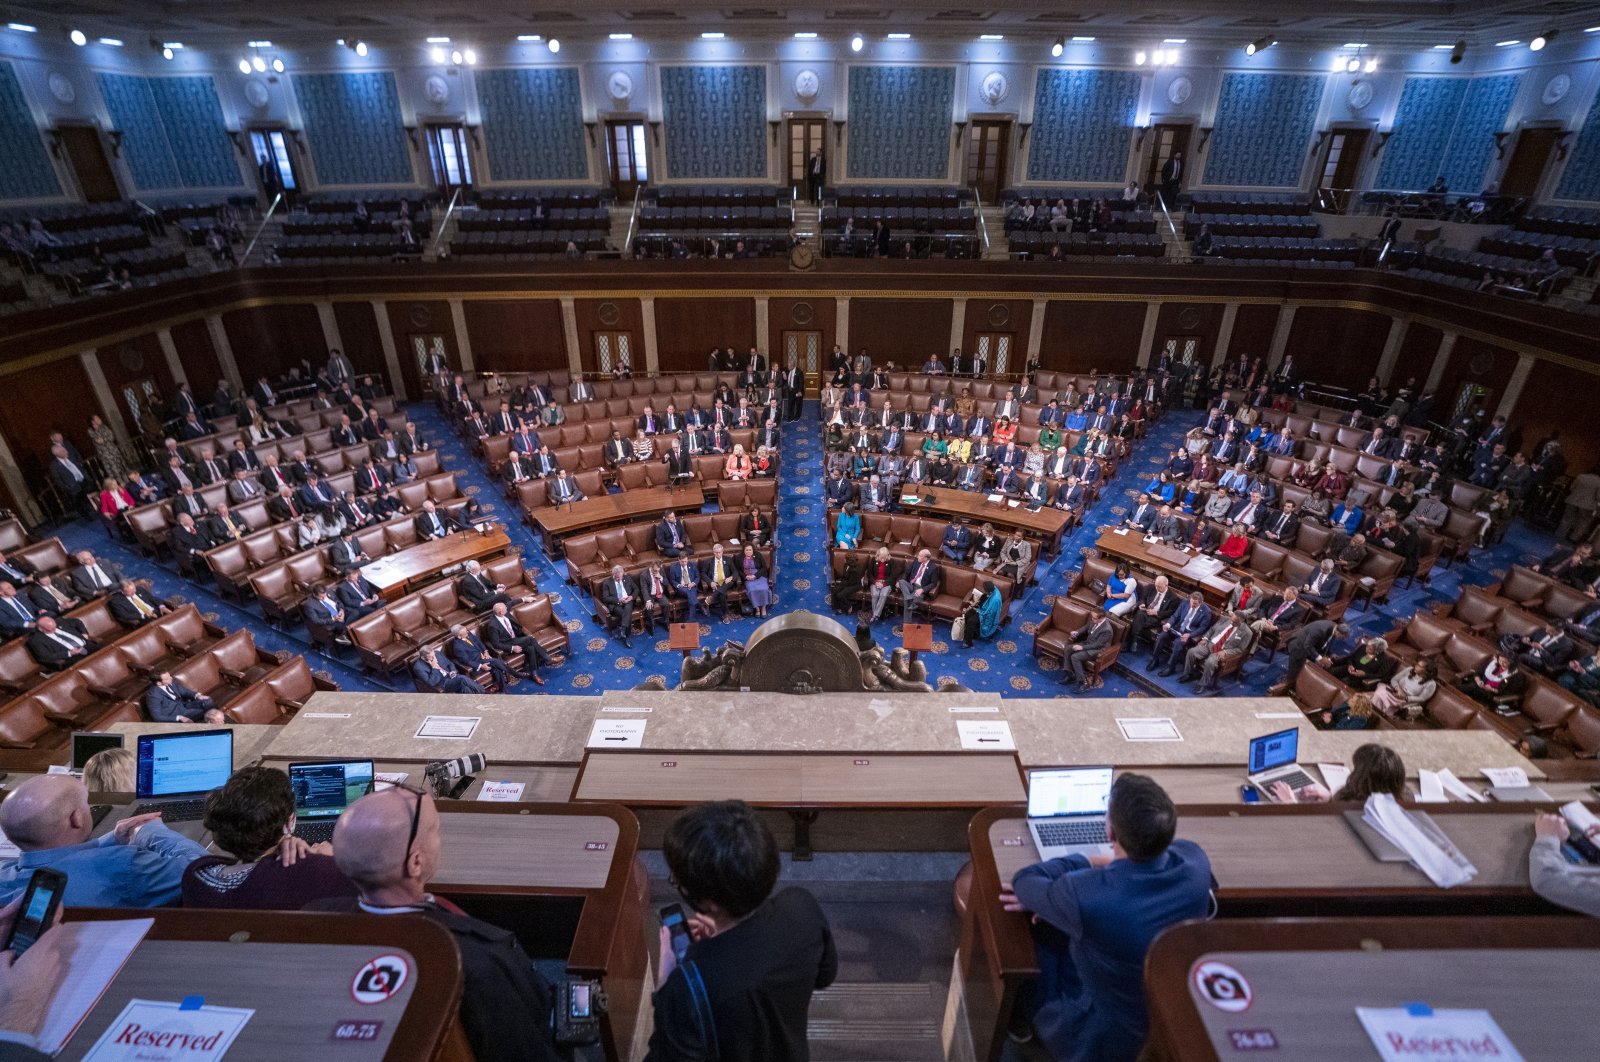 Members of news media look on as voice votes are cast in the House chamber on the third day of the House of Representatives trying to determine who will become the next Speaker of the House, at Capitol Hill in Washington, D.C., Jan. 5, 2023. (EPA Photo)